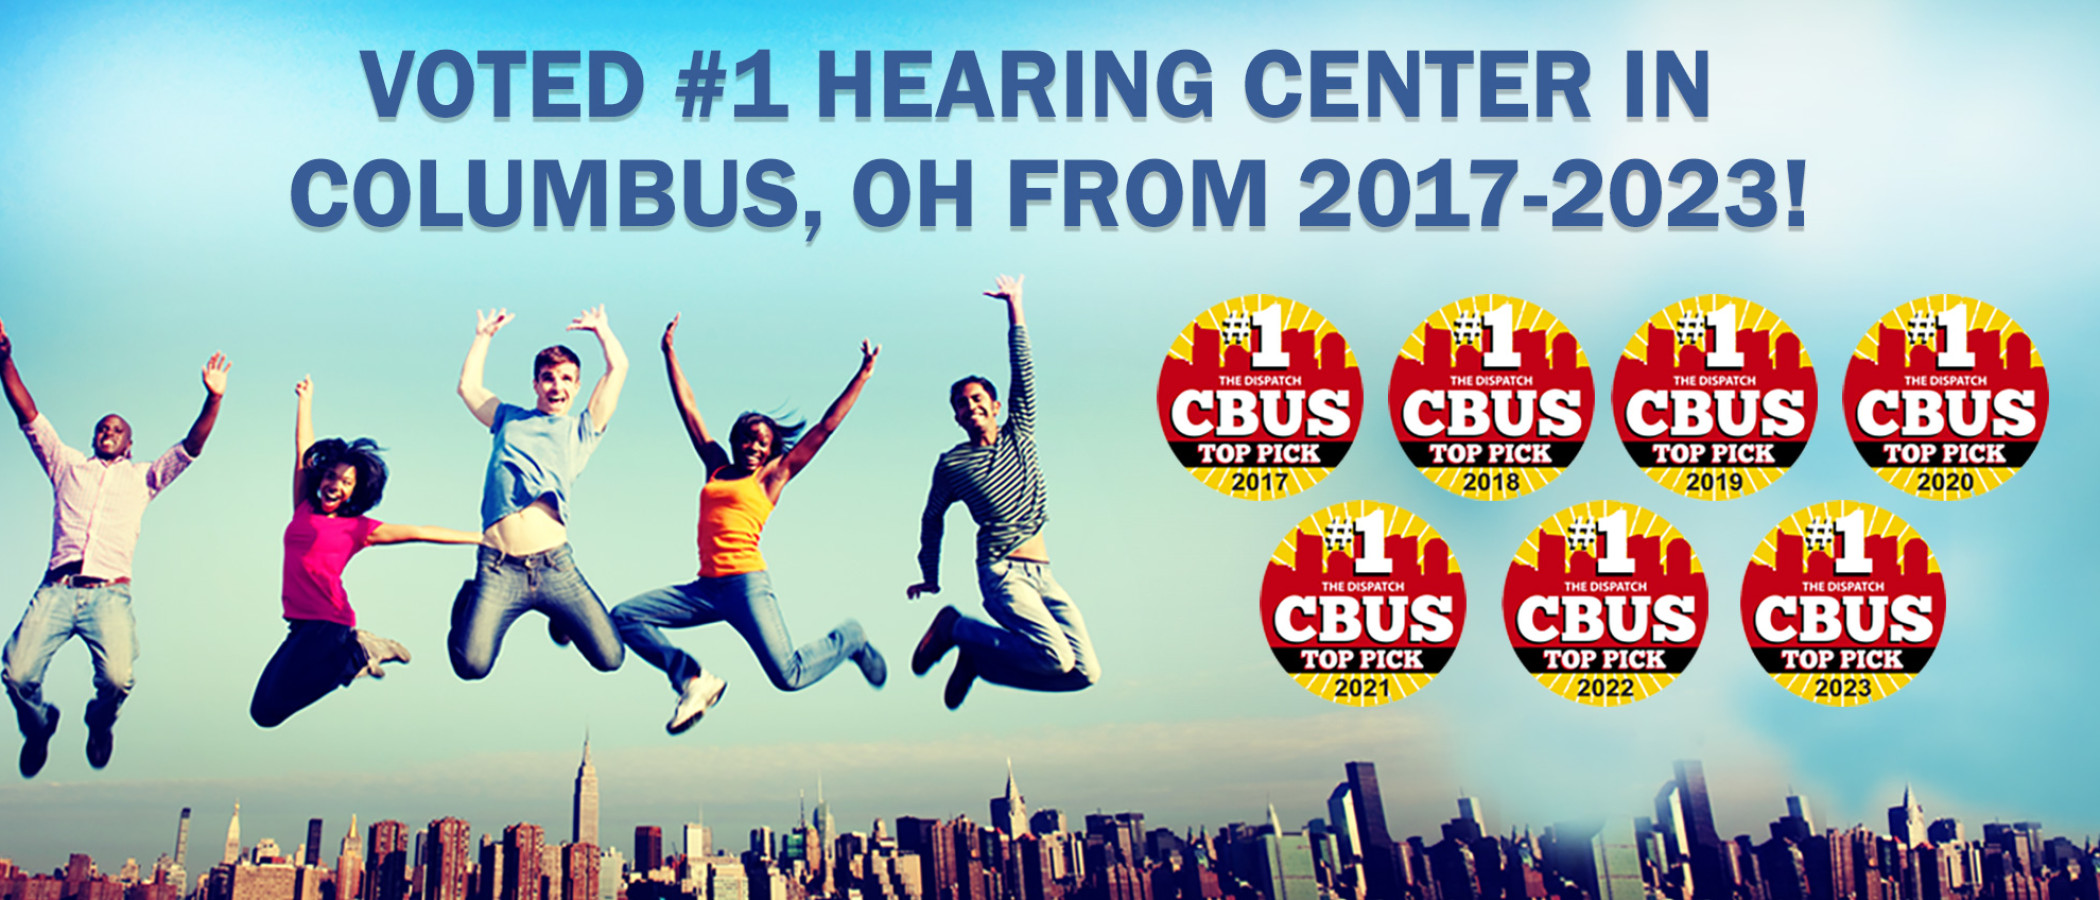 Voted #1 hearing center in Columbus from 2017-2023